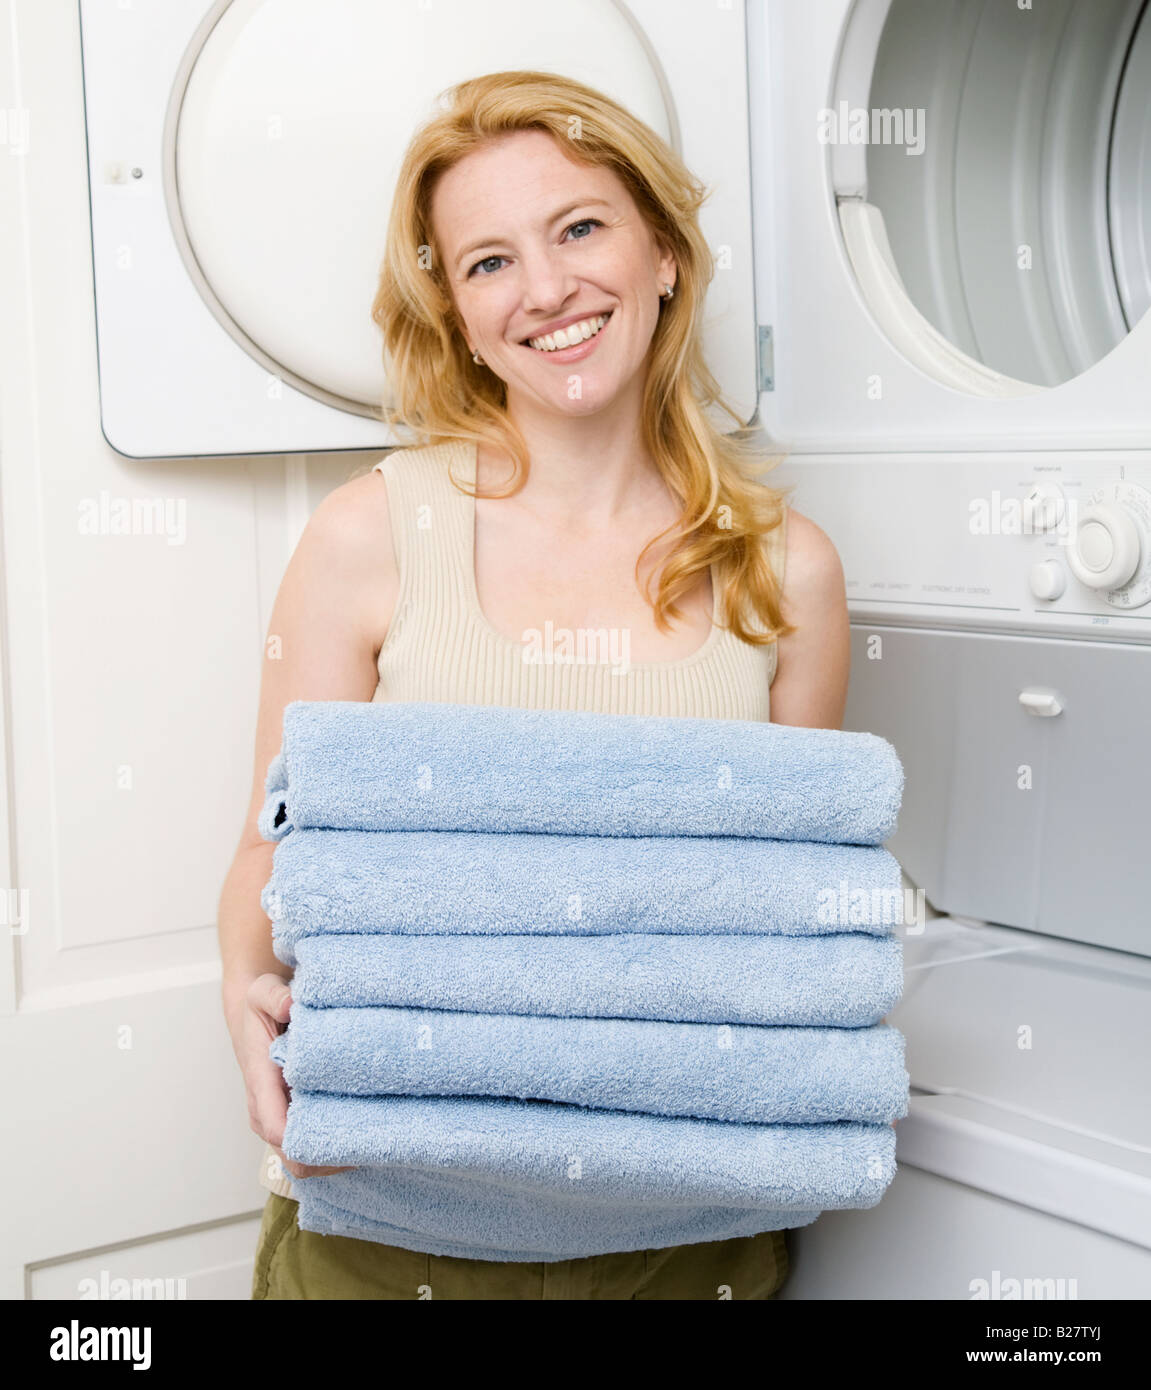 Woman holding folded towels Stock Photo